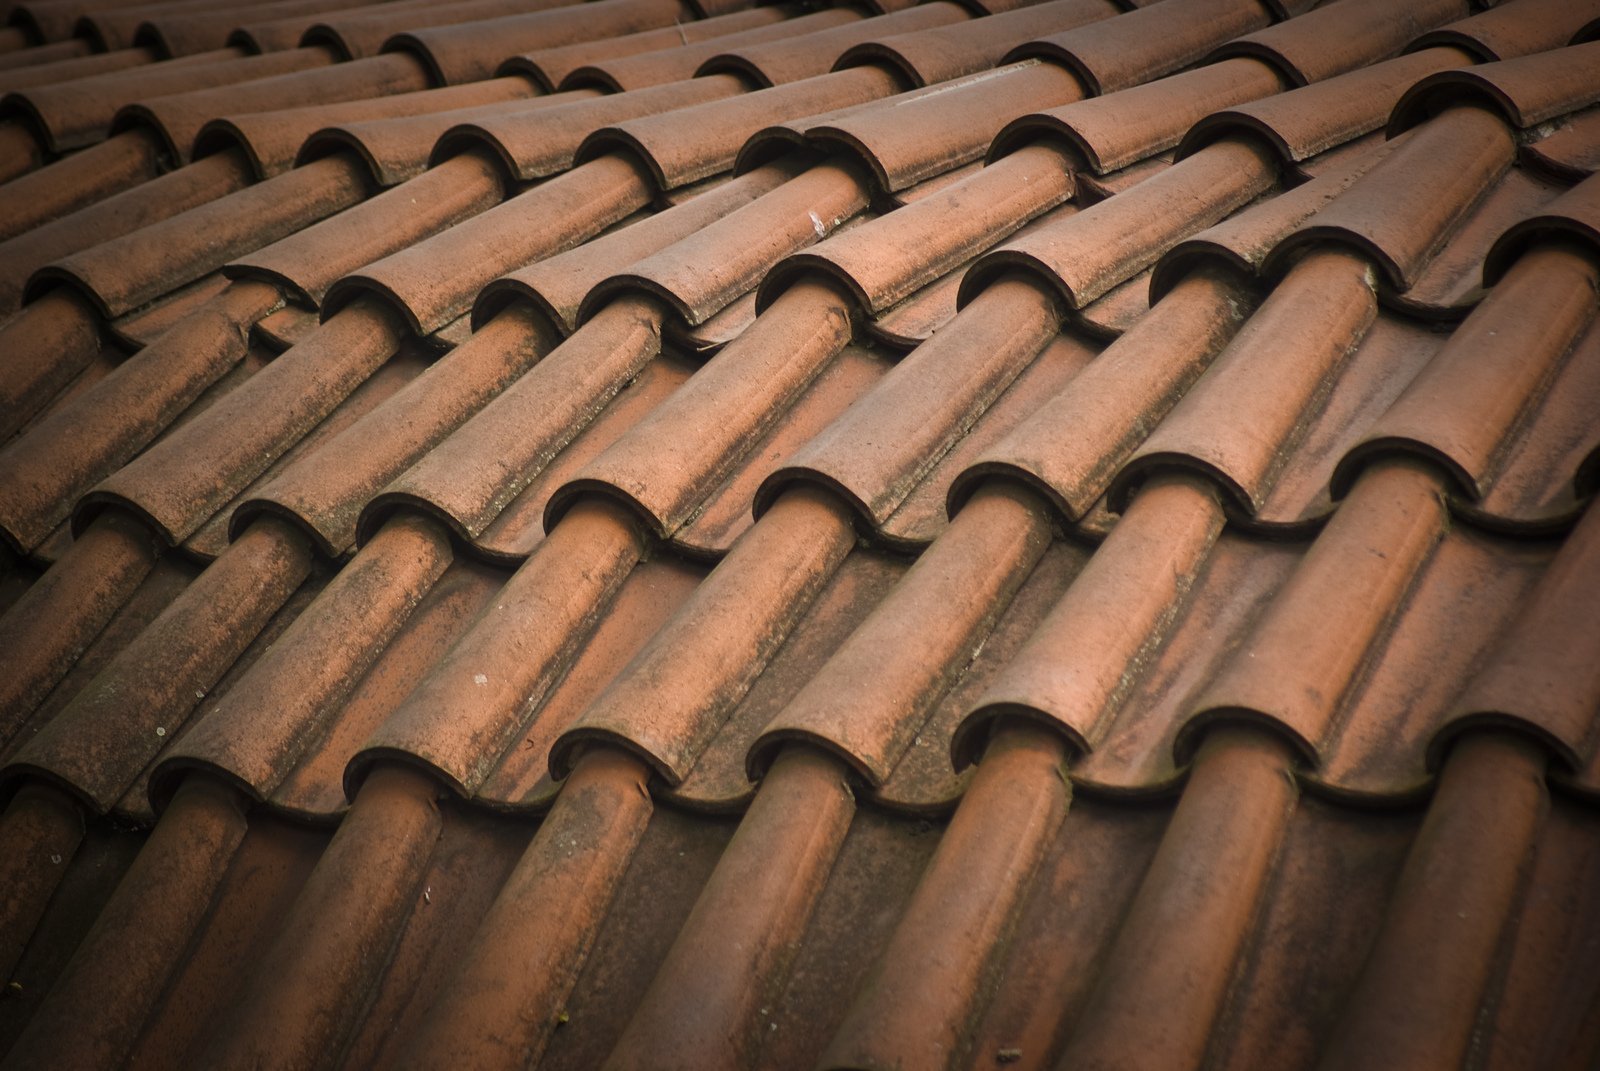 this is an image of rows of roof tiles